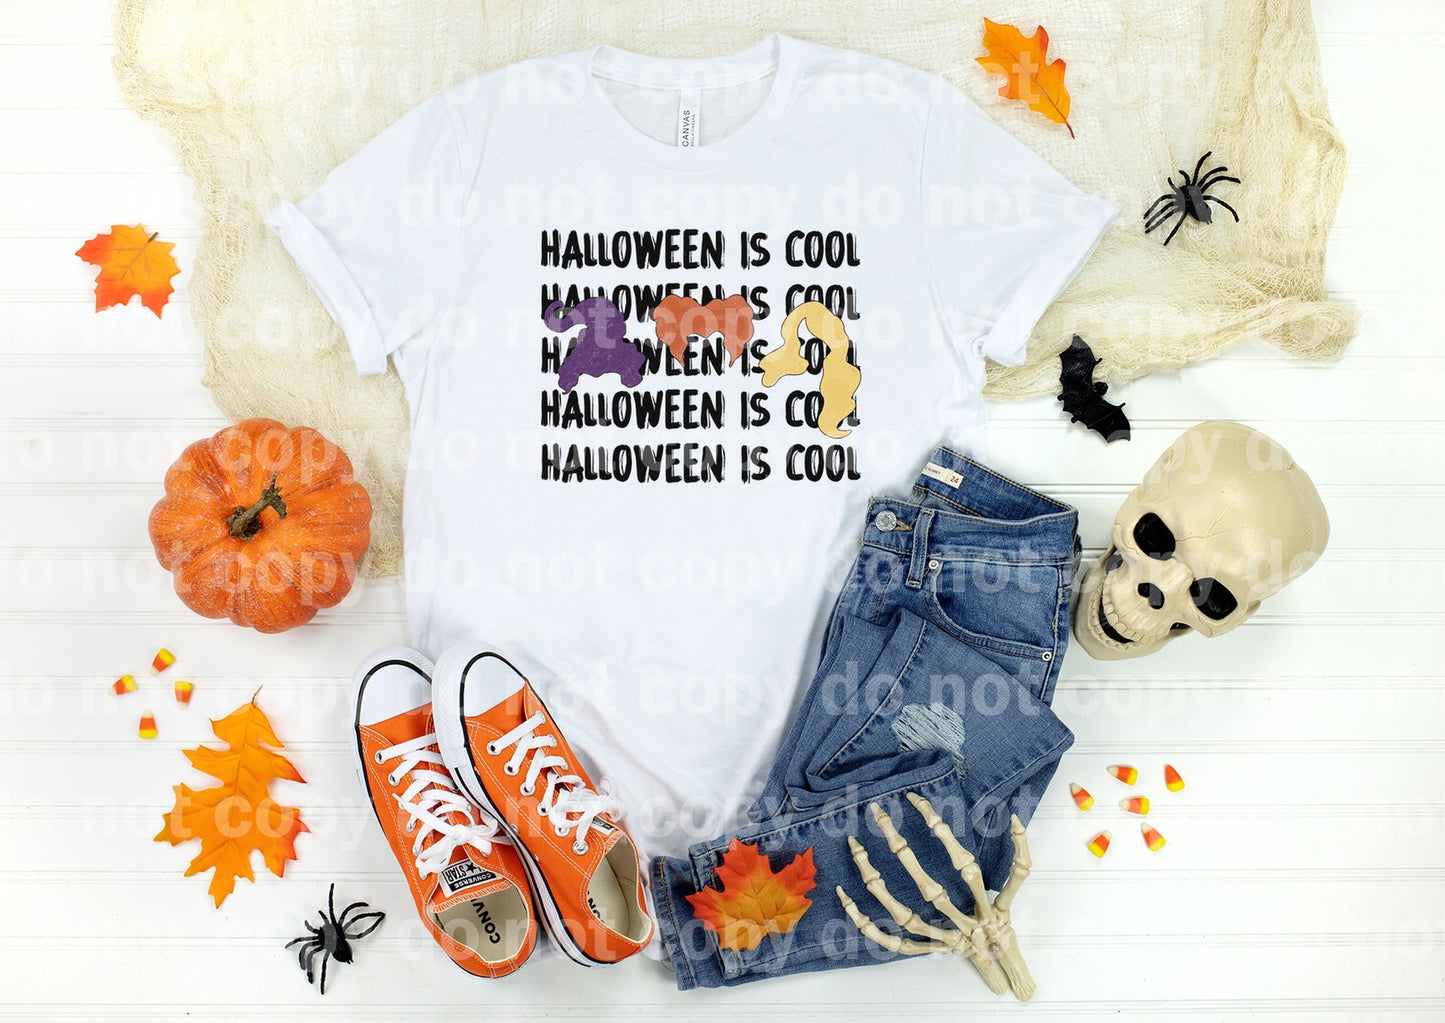 Halloween is Cool Full Color/One Color Dream Print or Sublimation Print